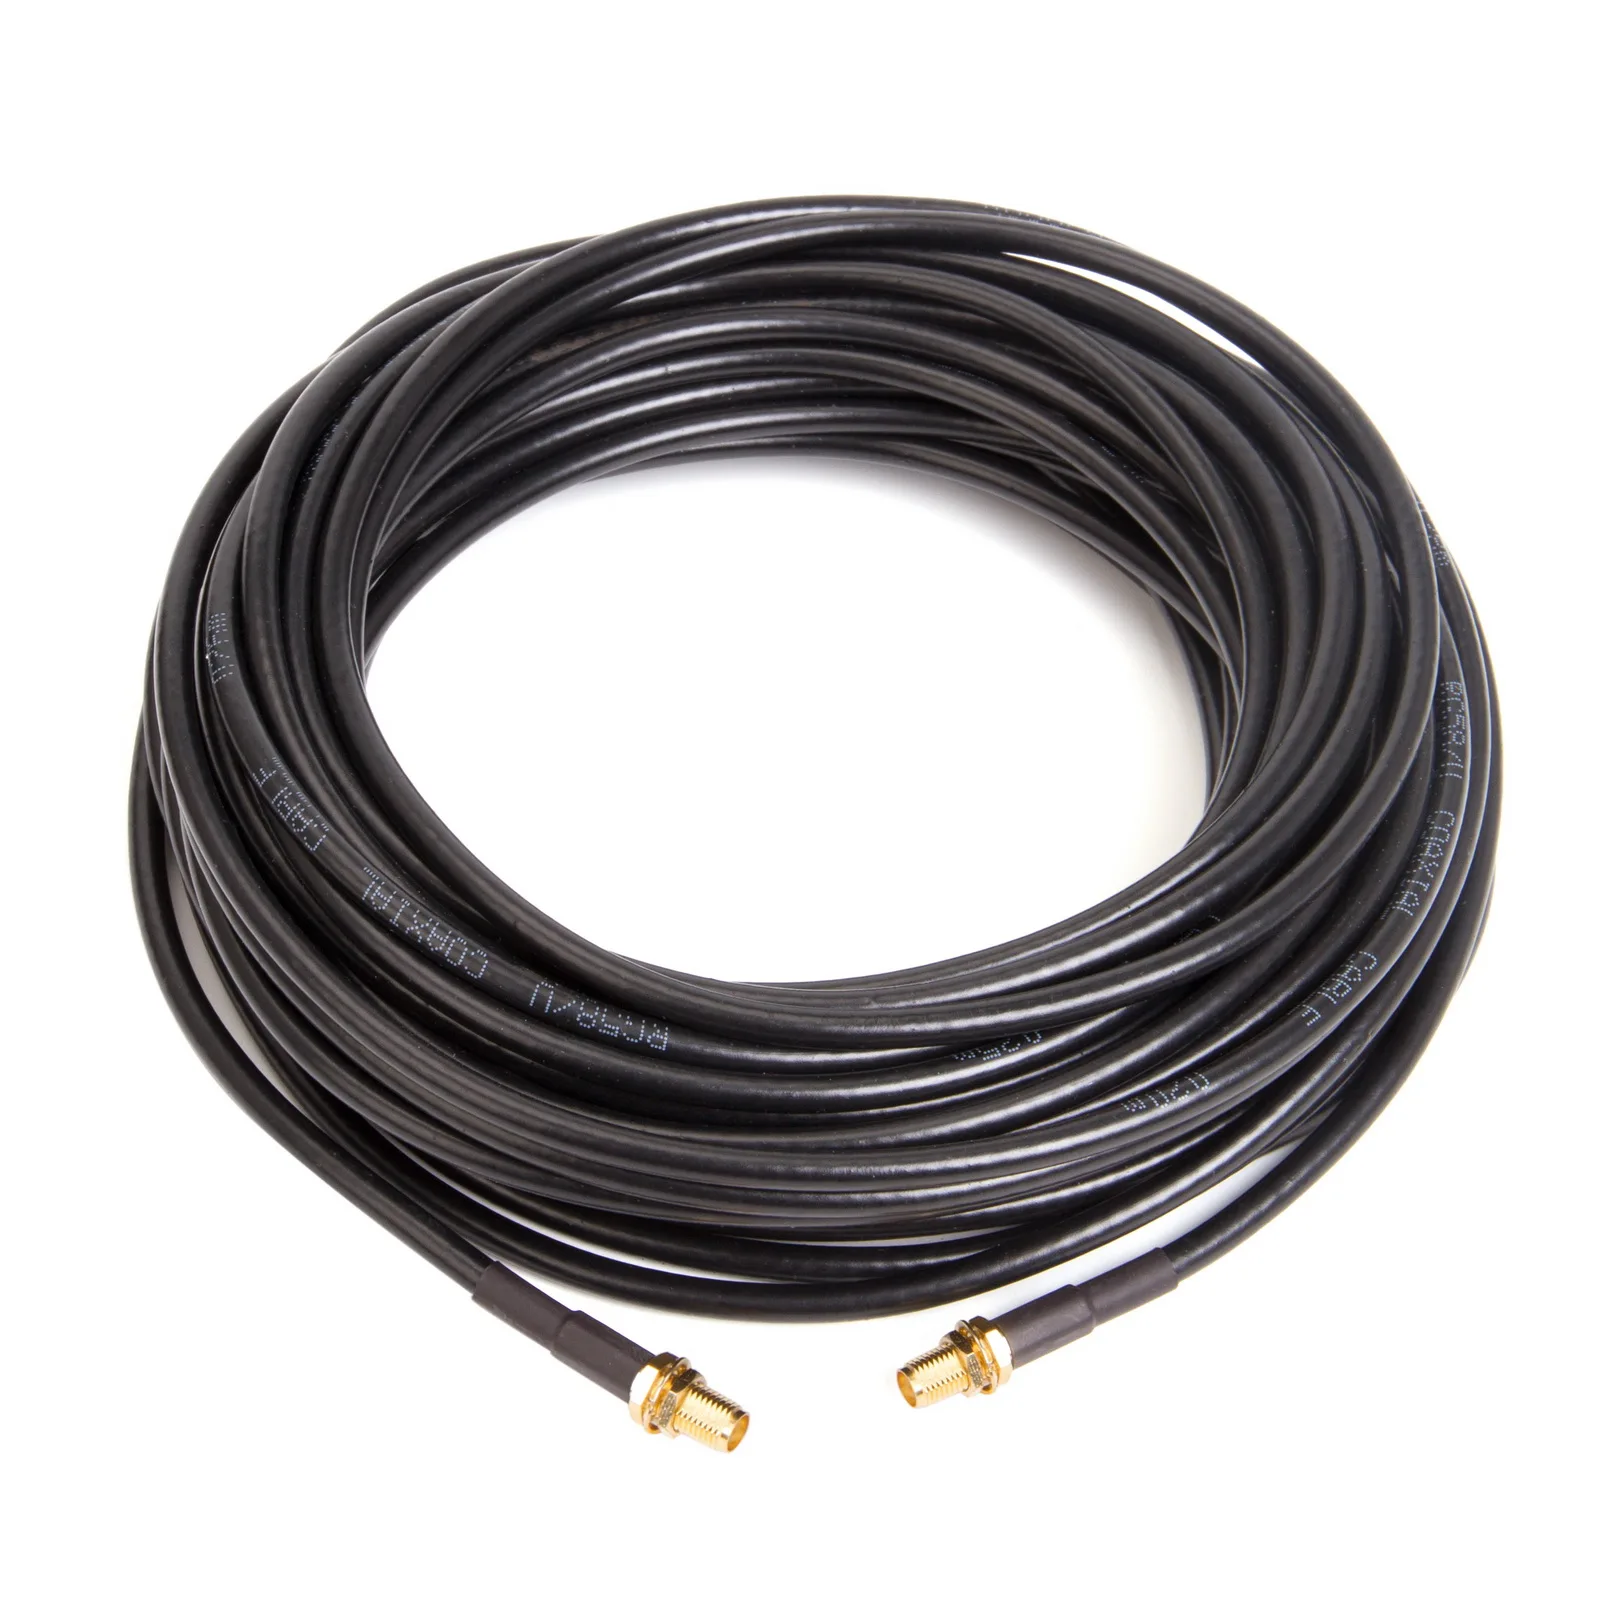 5M SMA female to SMA female Extension Cable for Coax Coaxial WiFi Network Card Router Antenna WIFI Antenna RF Connector RG174 5m sma female to sma female extension cable for coax coaxial wifi network card router antenna wifi antenna rf connector rg174